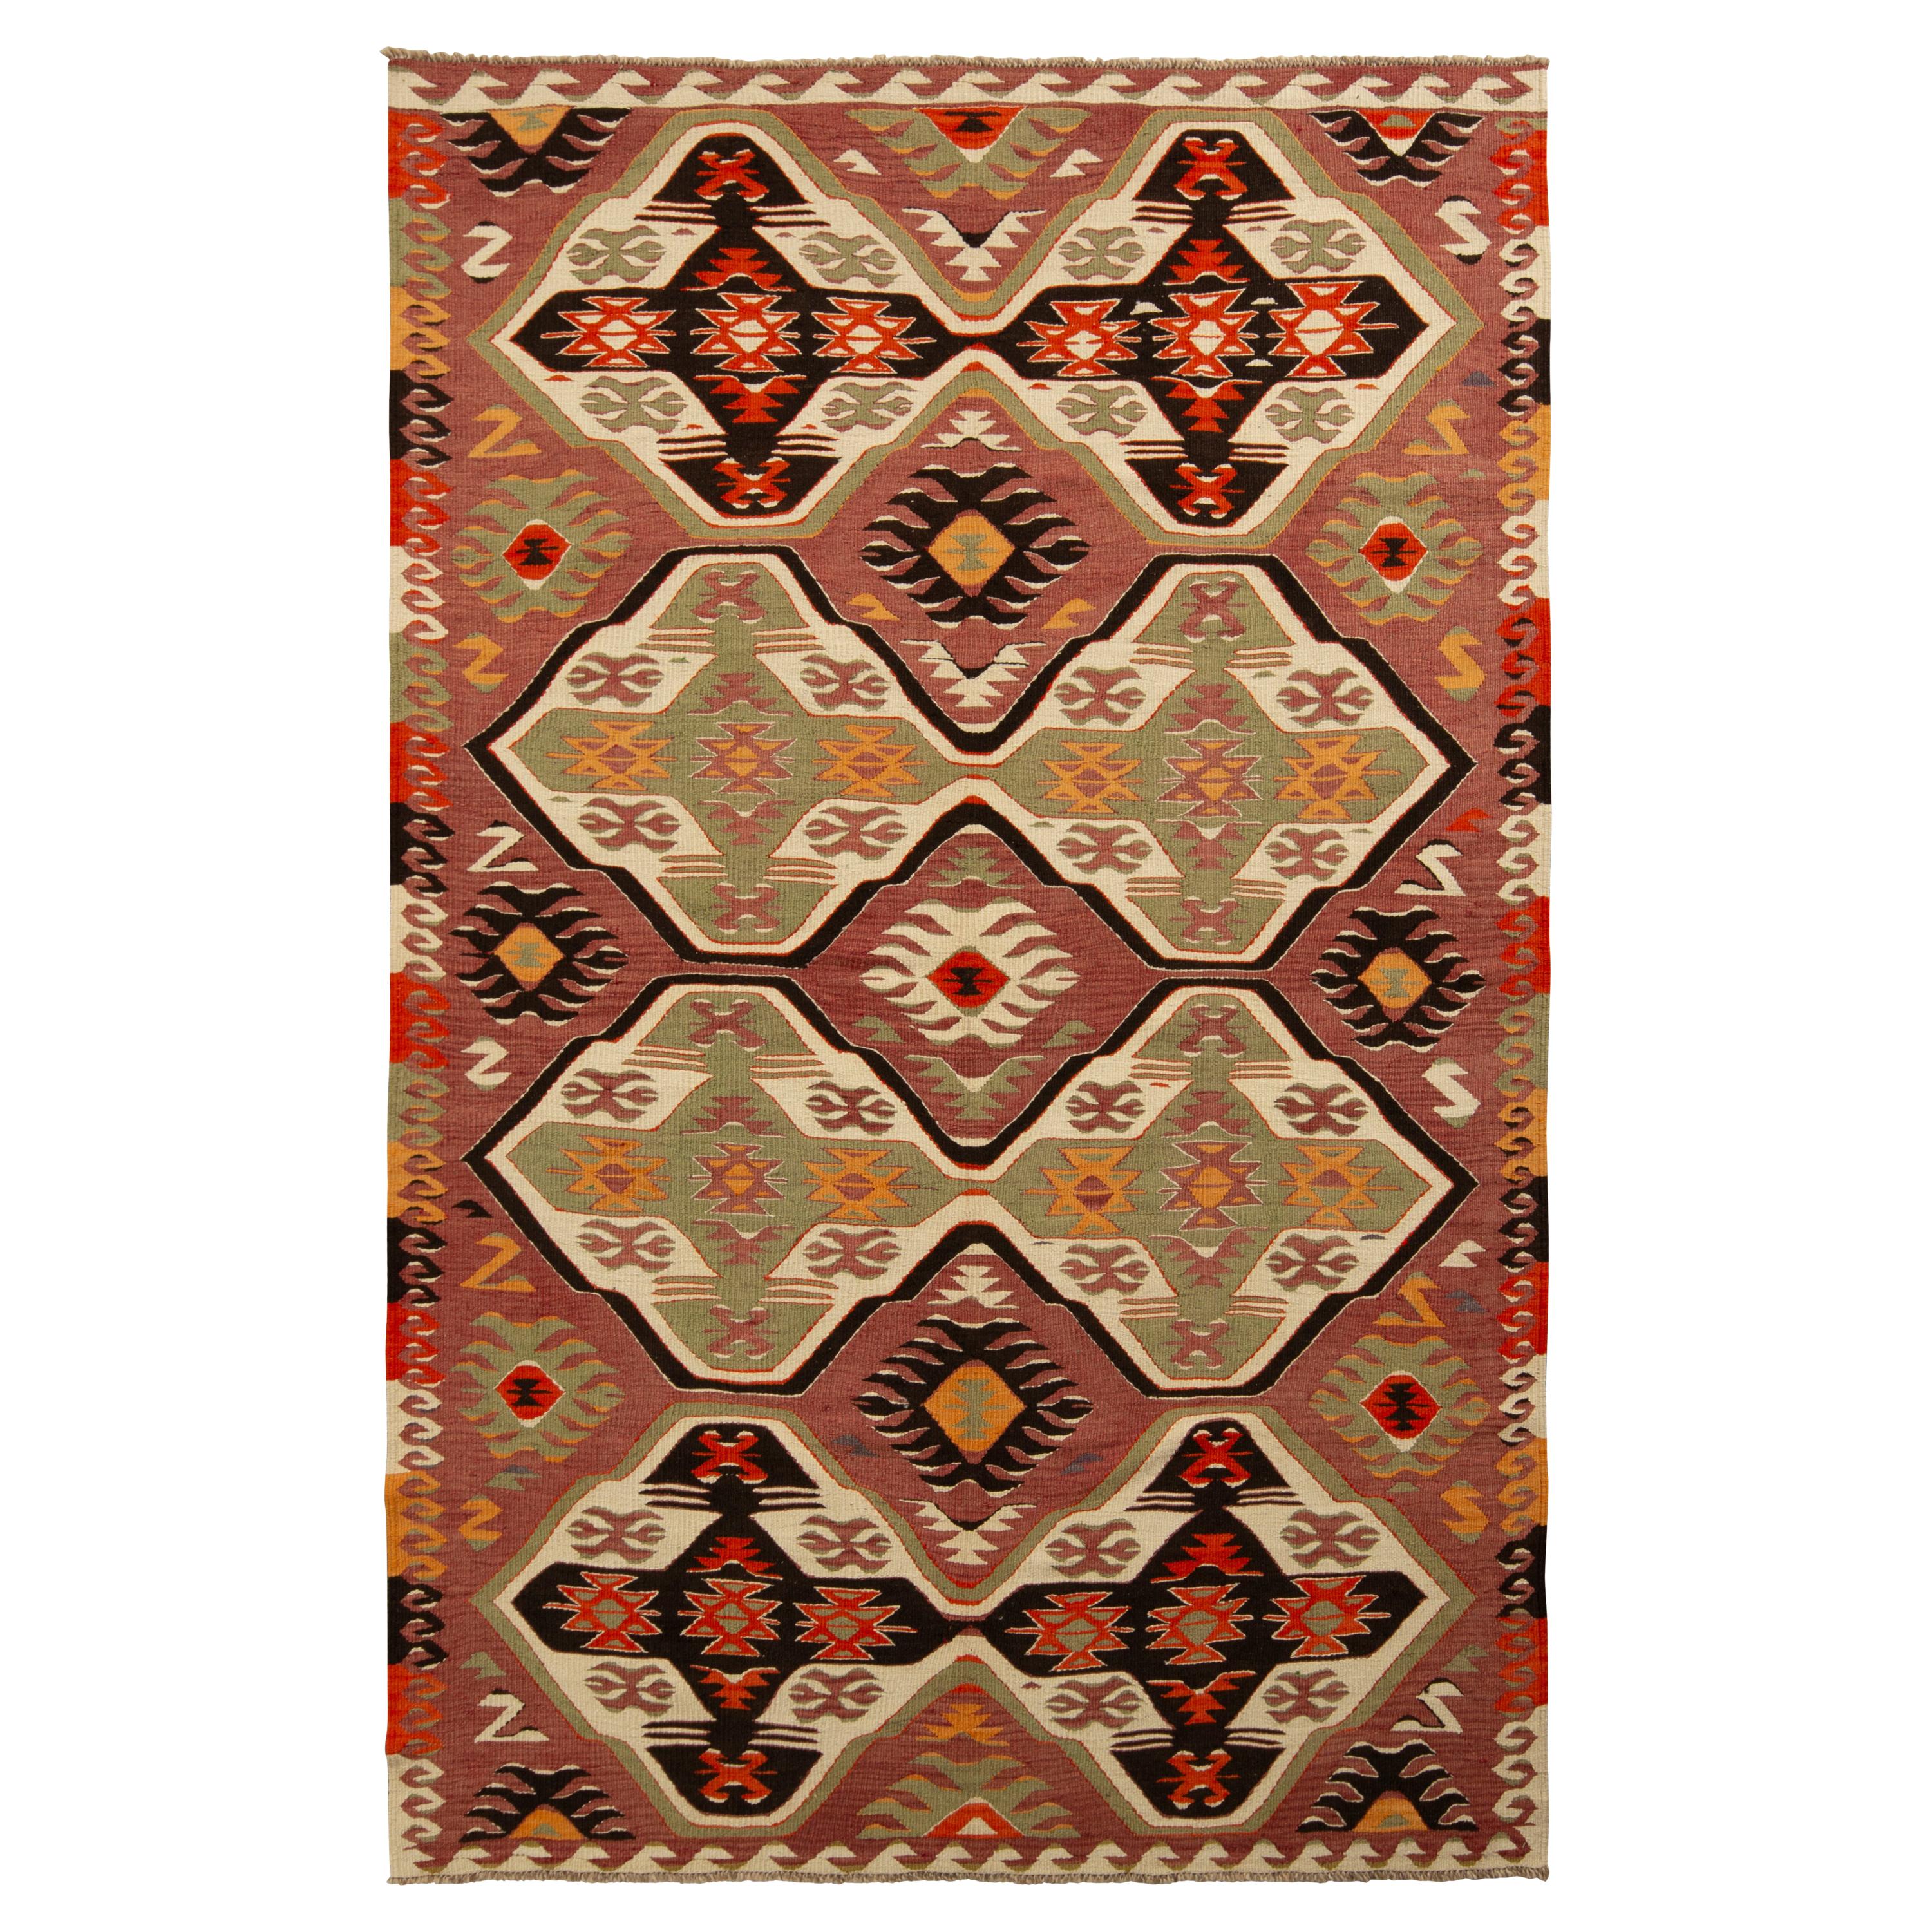 Handwoven Vintage Tribal Kilim Rug in Pink and Green Geometric Pattern